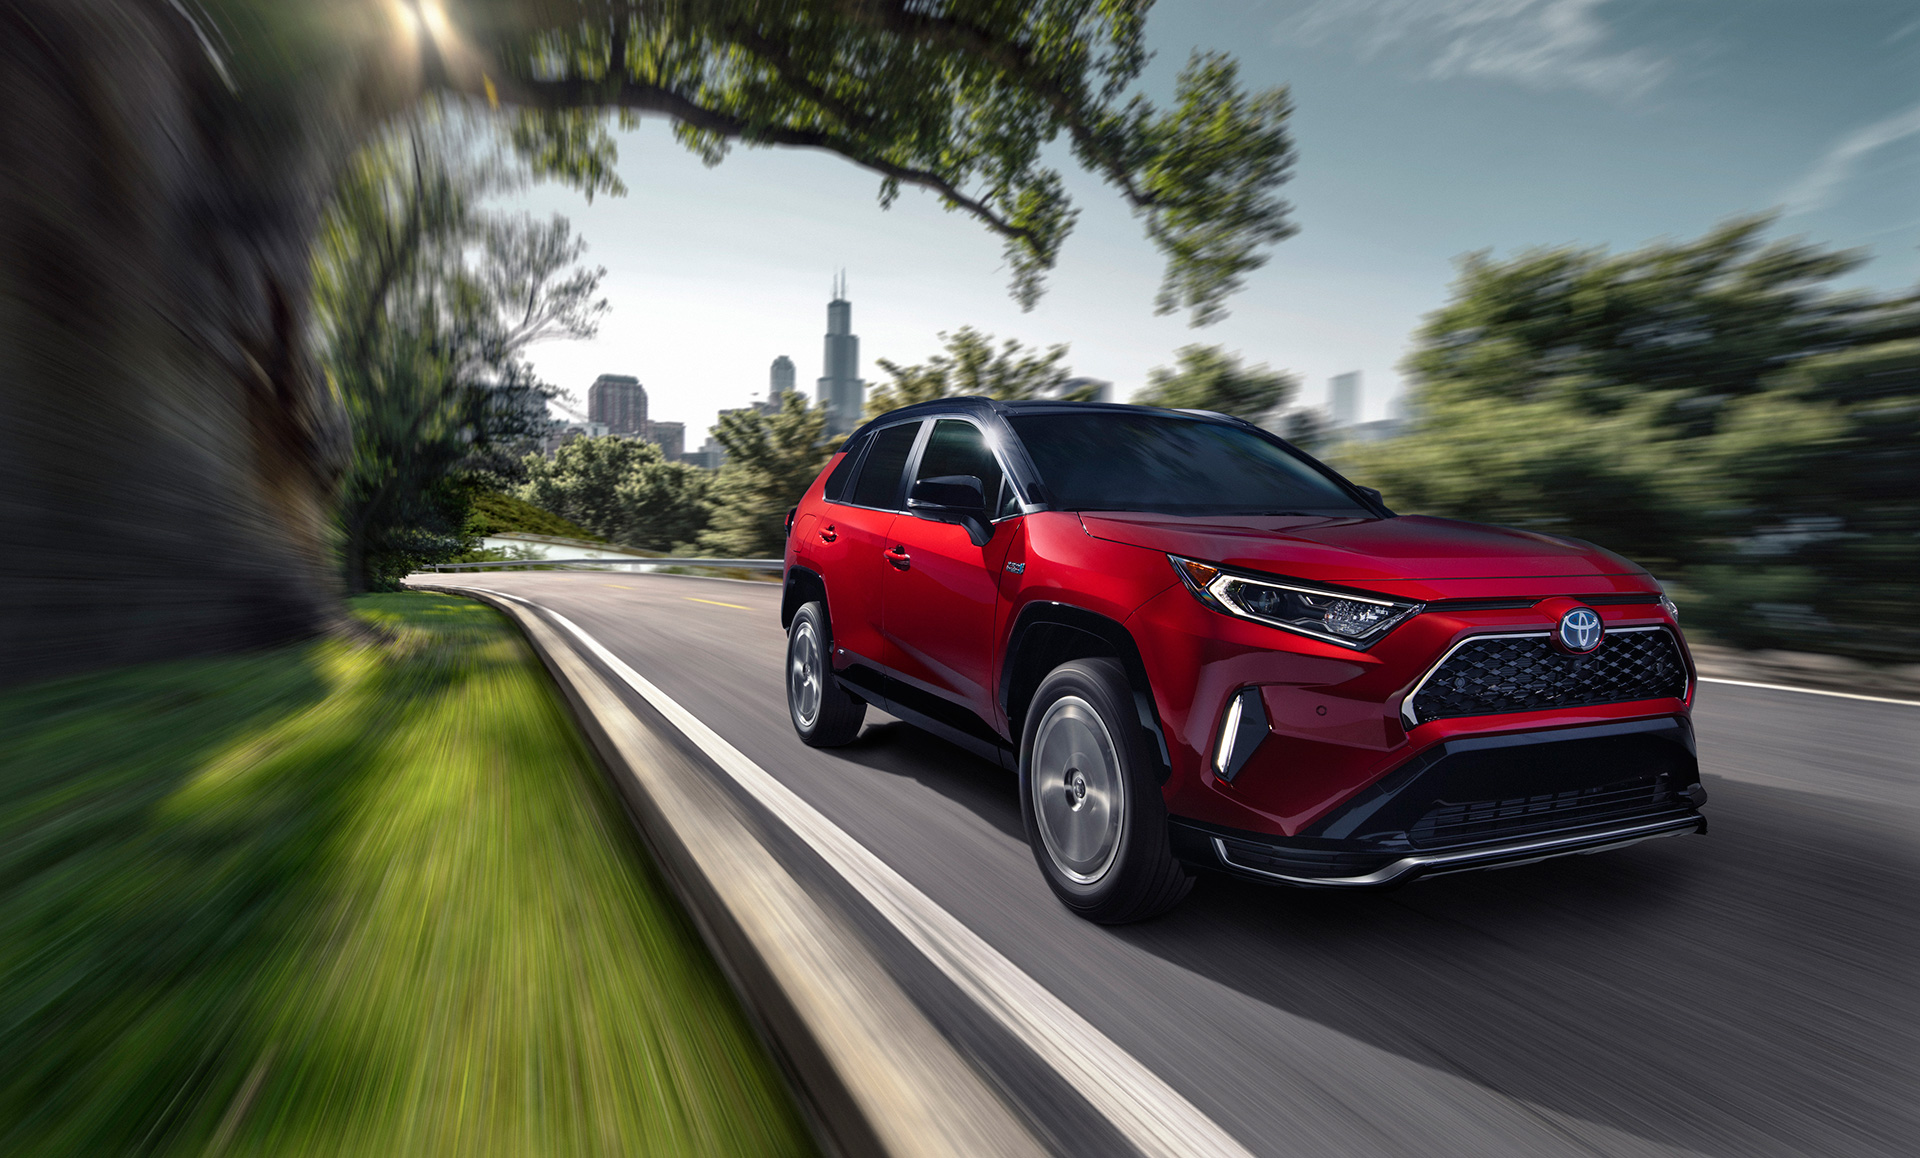 Toyota Revs Up Lineup with New 302-Horsepower RAV4 Prime - Image 3